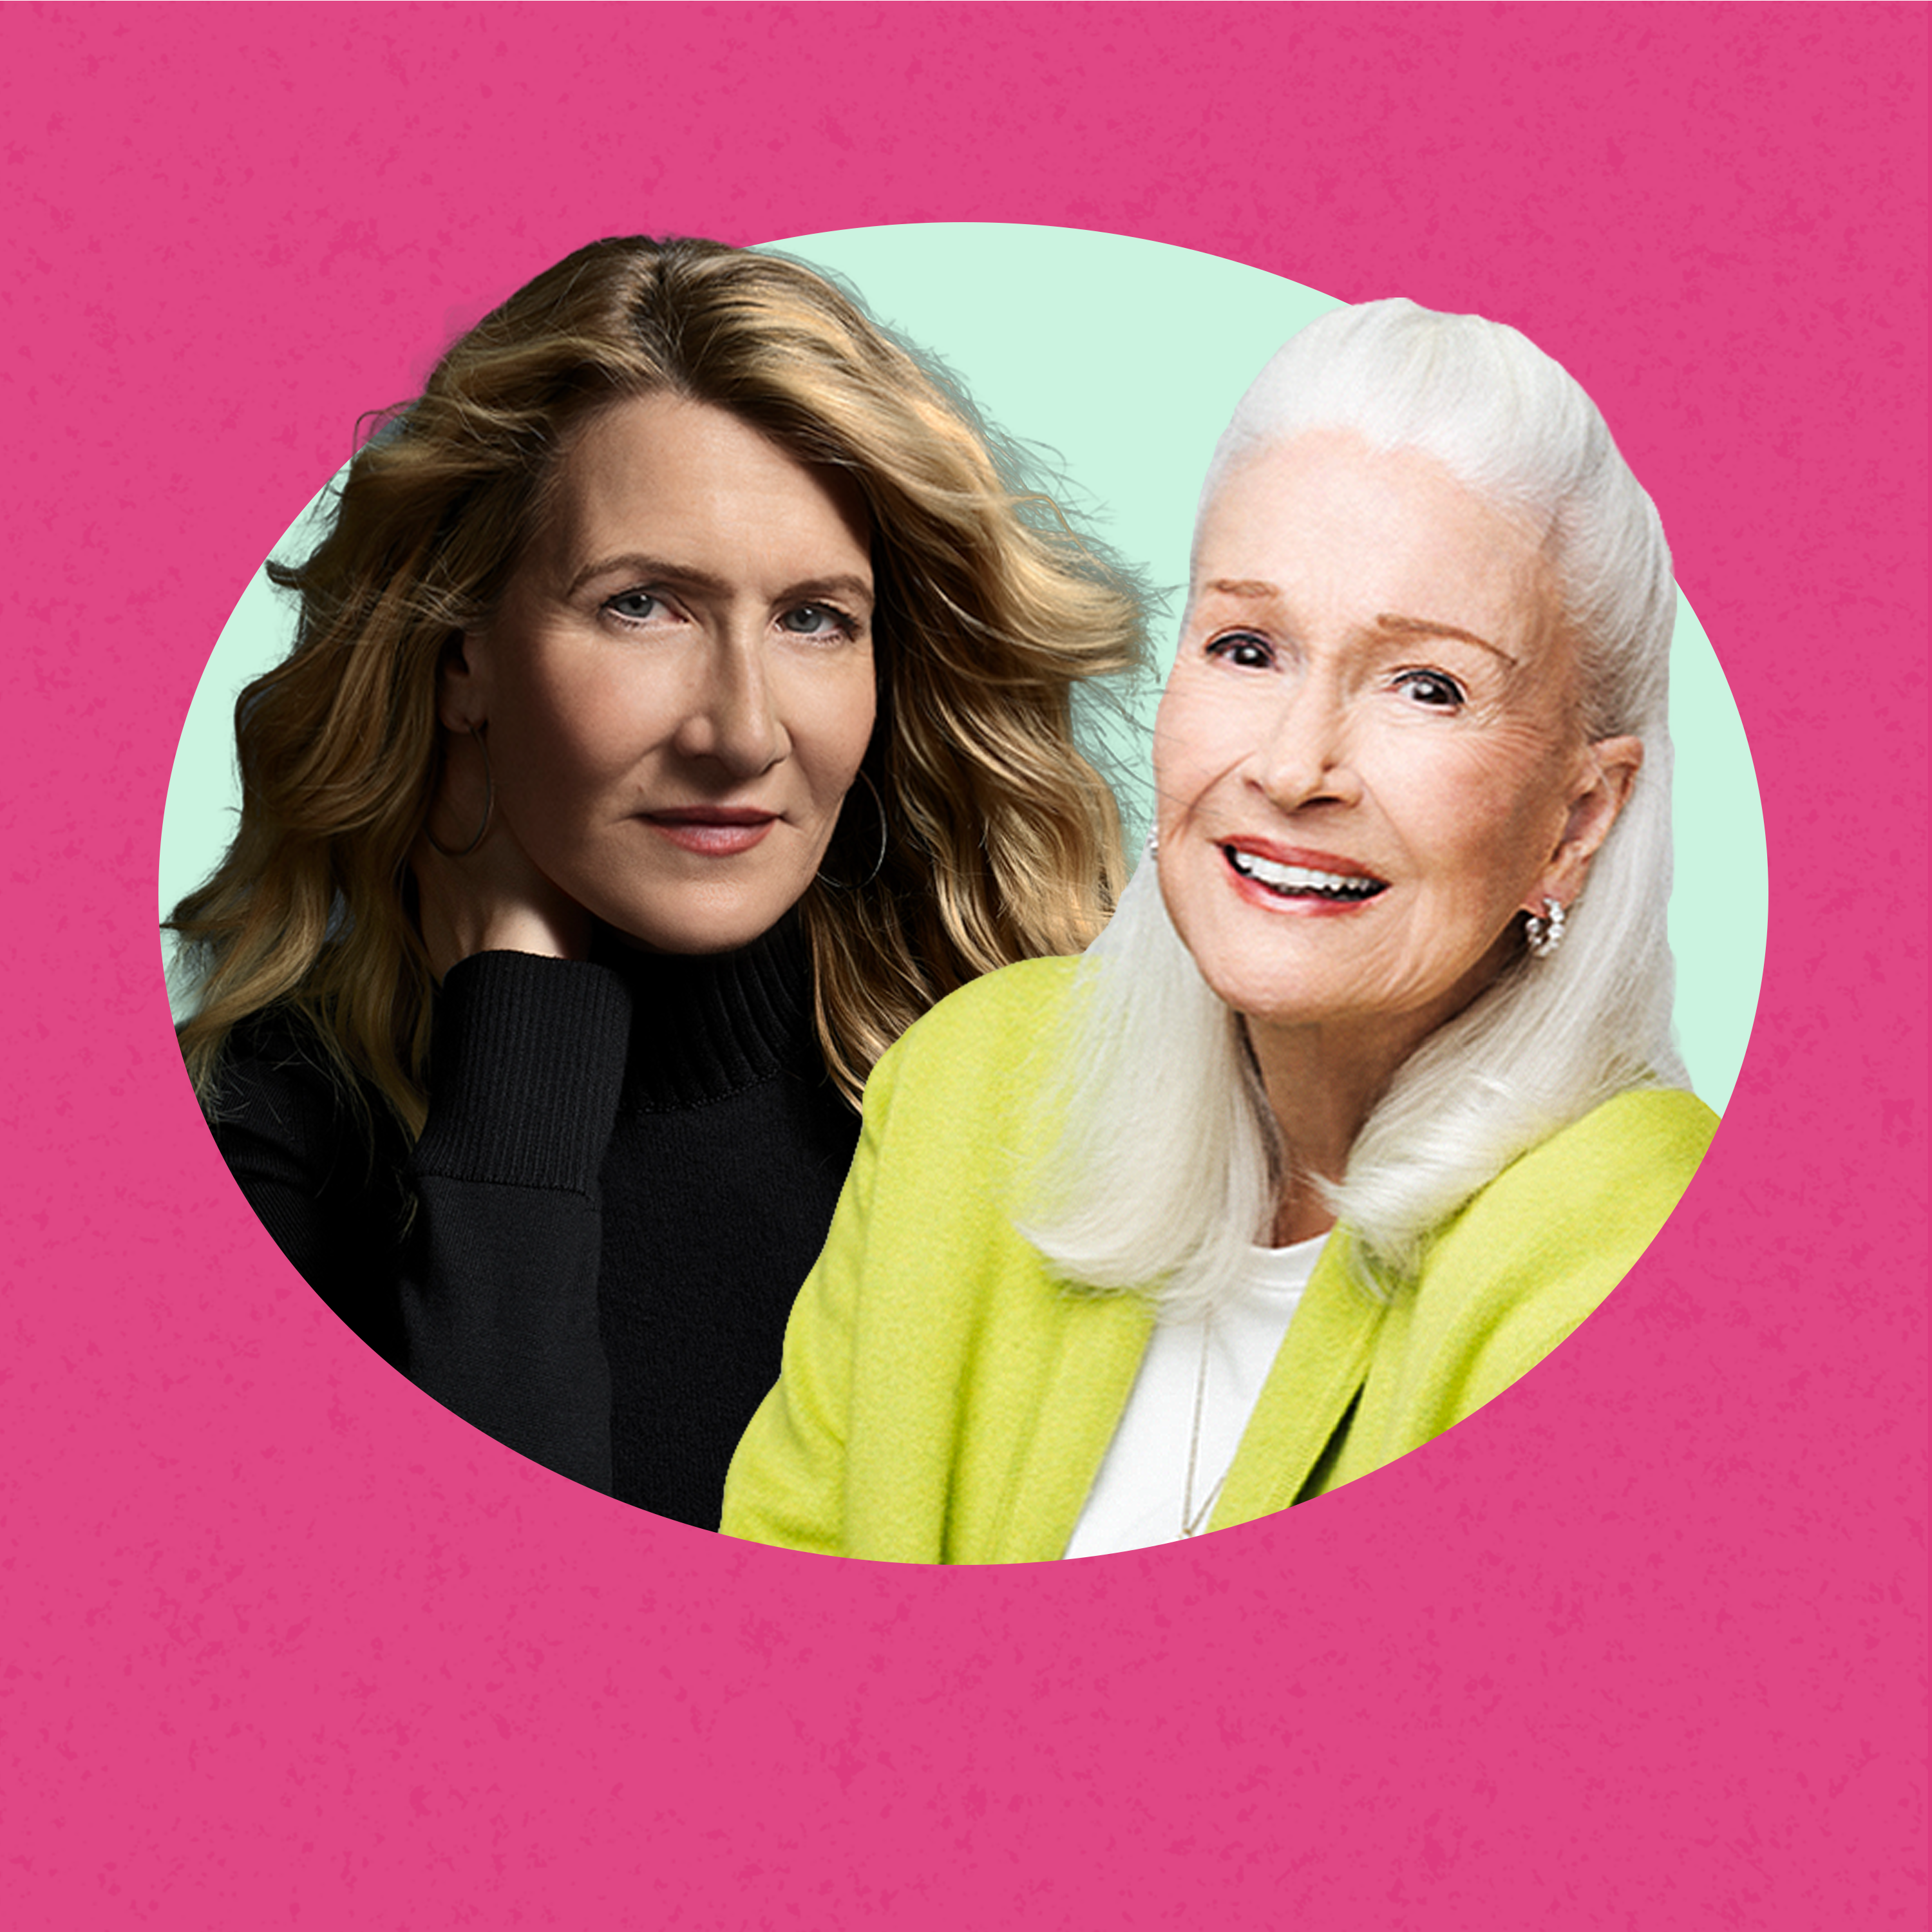 Choices We Made: Honest Conversations or Family Secrets? (with Laura Dern and Diane Ladd)